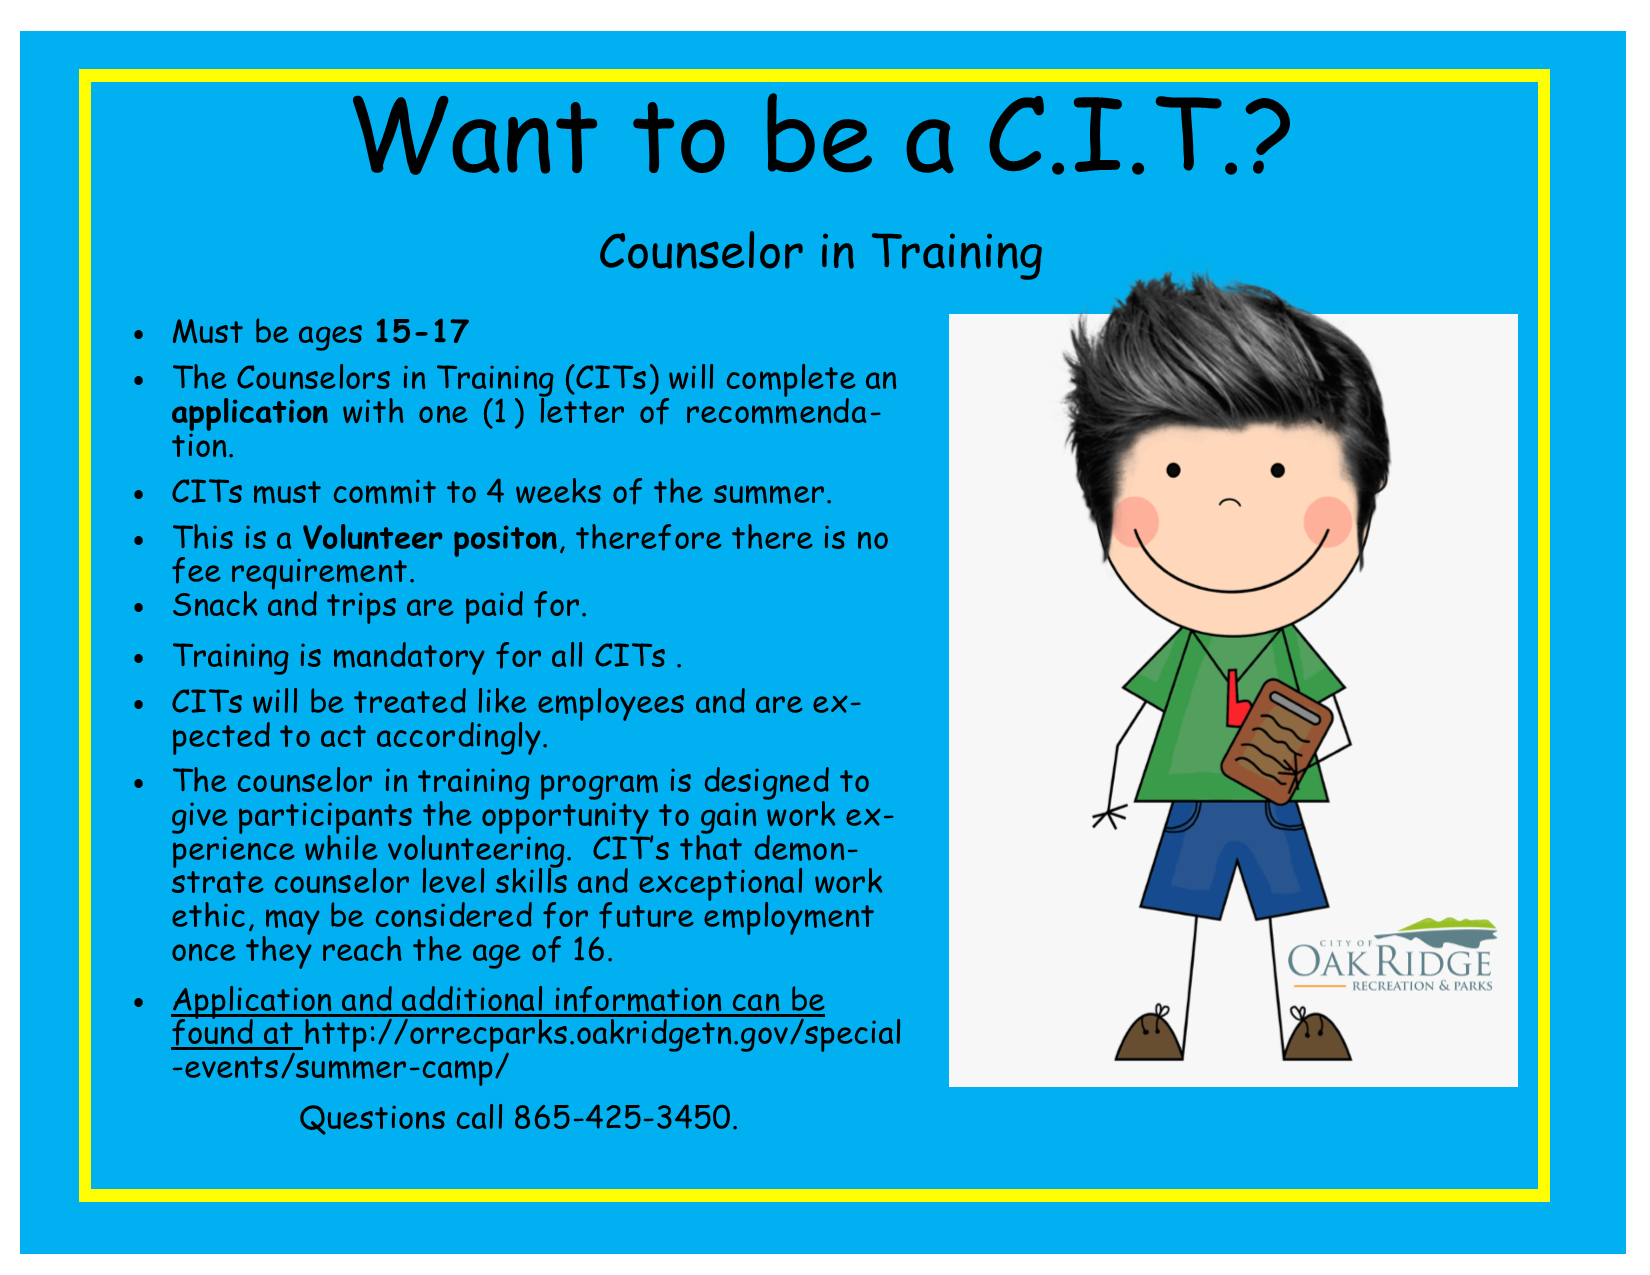 Counselors In Training (CIT) wanted for Summer Camp!